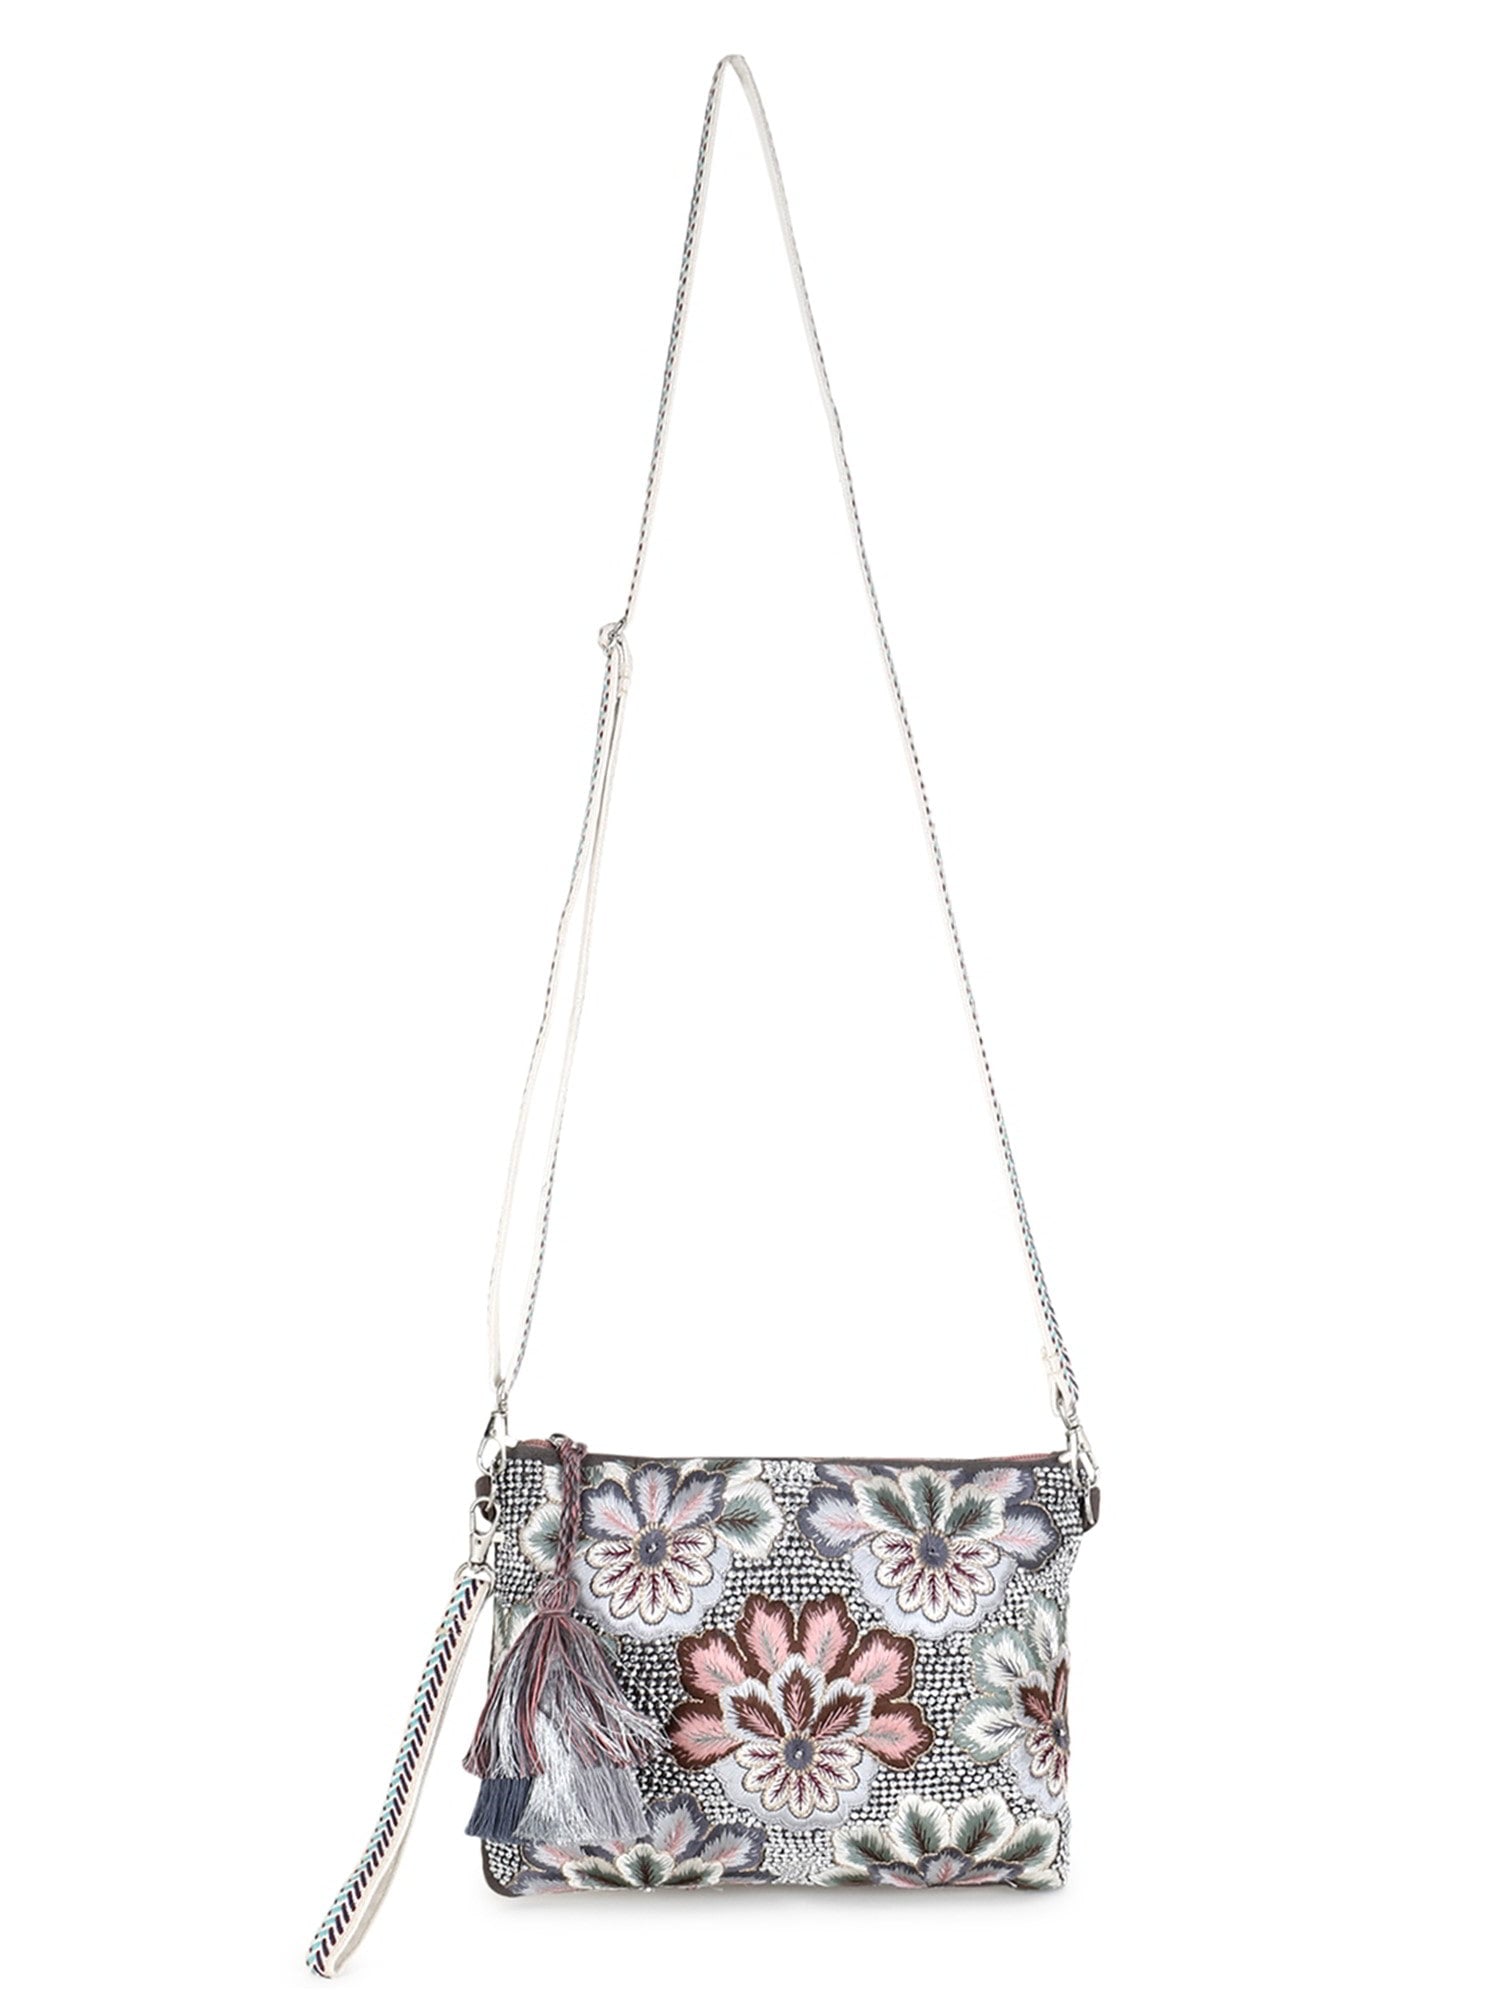 Ghoomar Acrylic Cotton Canvas Floral Embellished Sling Bag